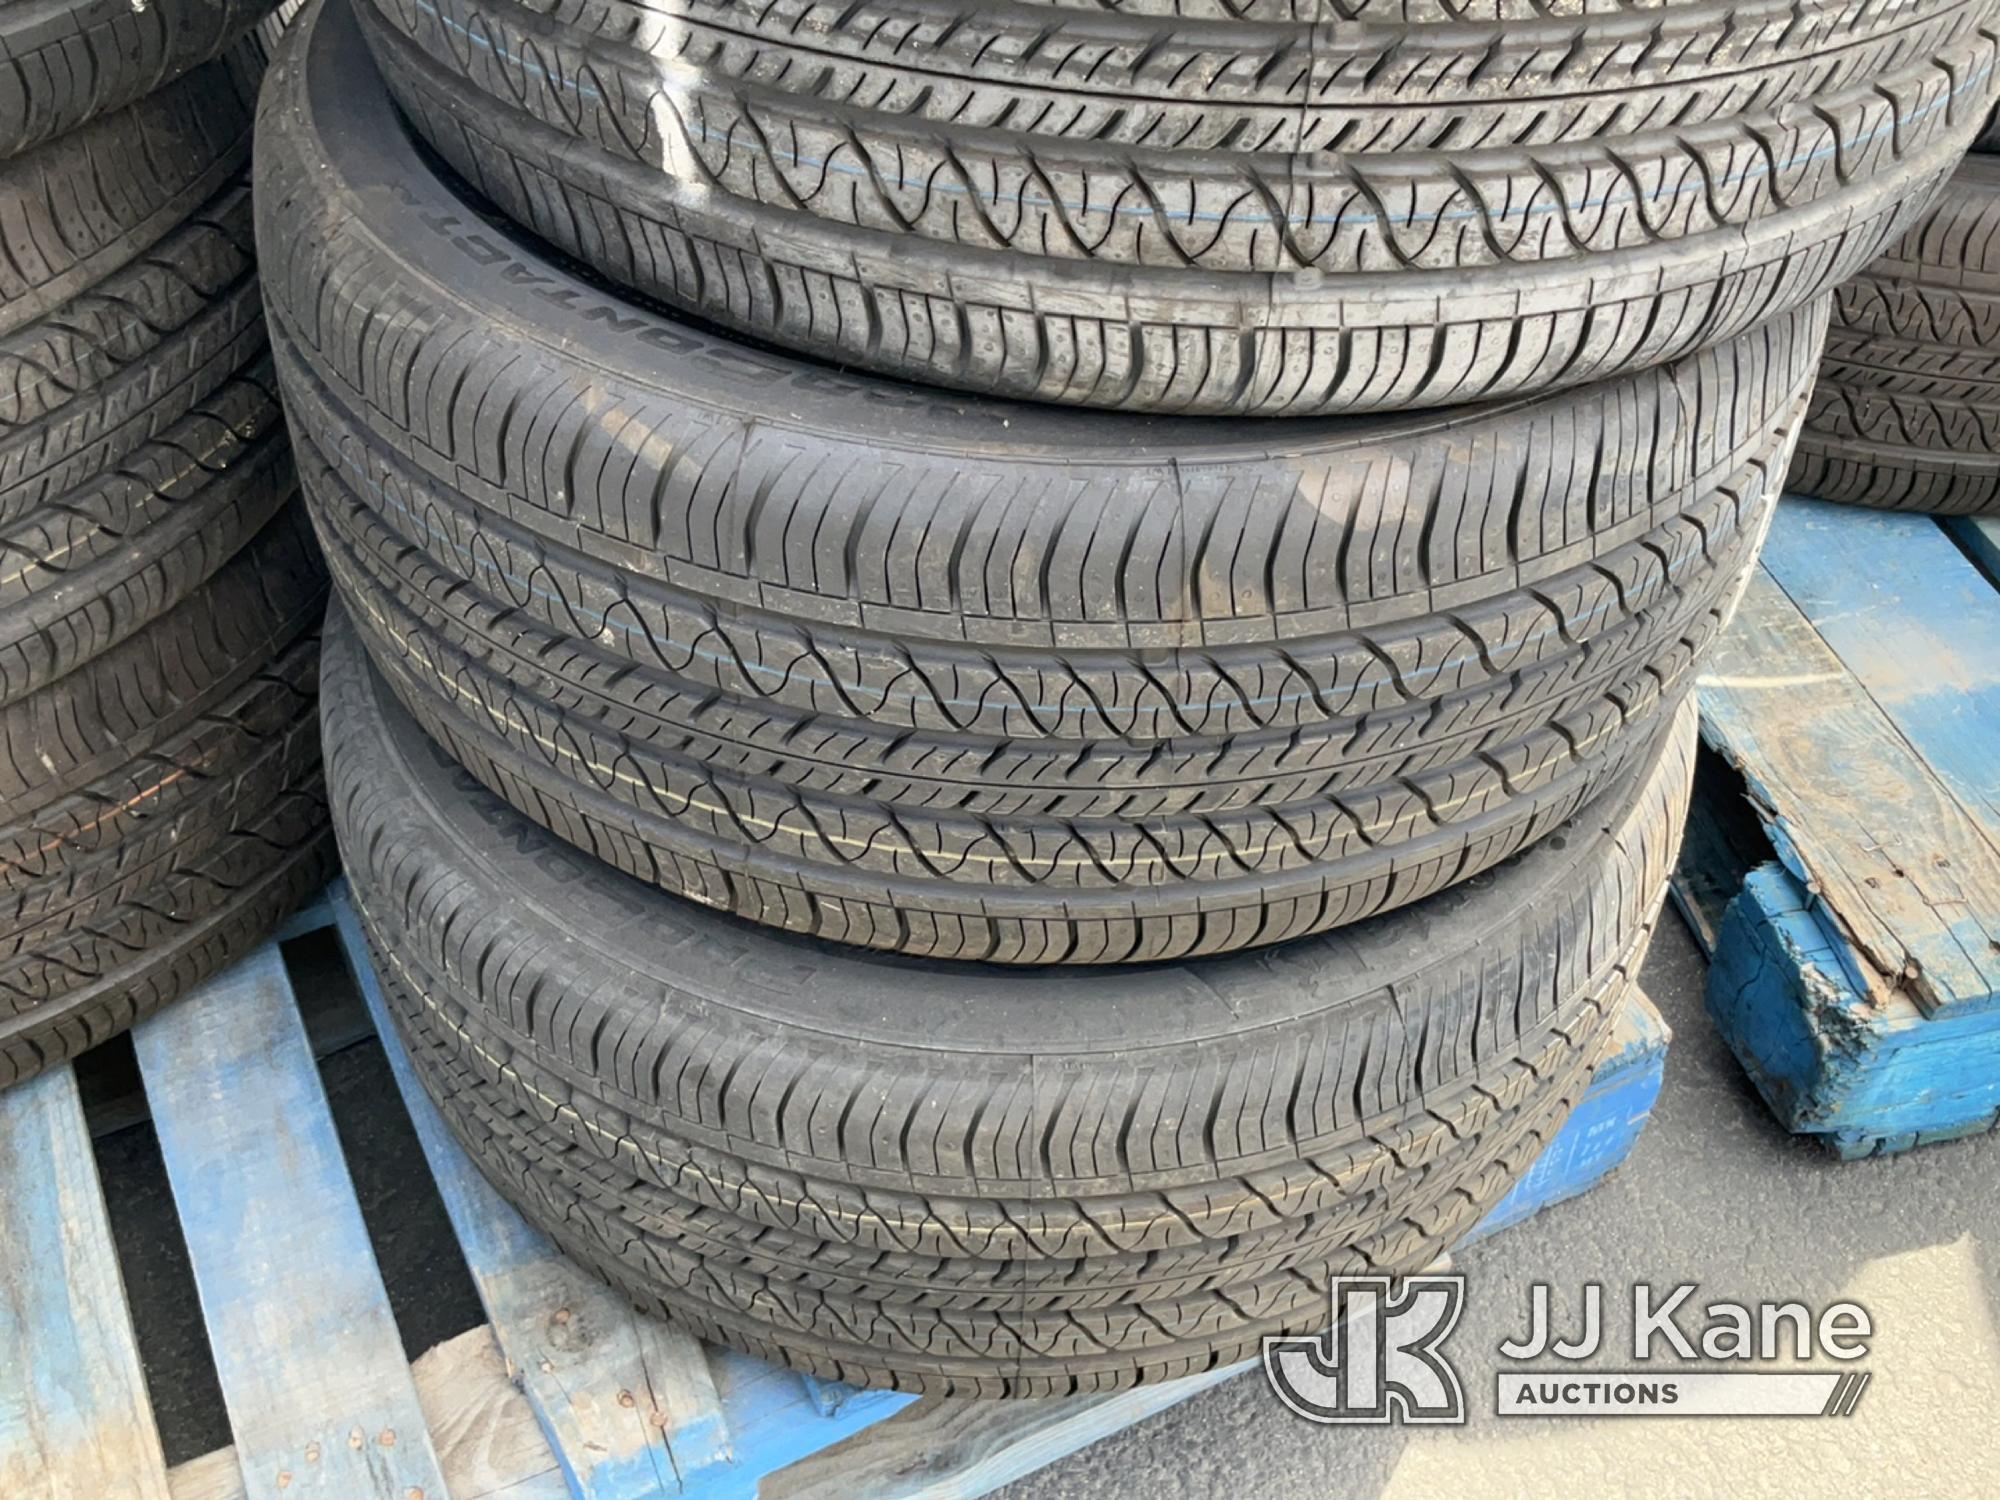 (Jurupa Valley, CA) 8 Tires Continental 255/45 r19 (New) NOTE: This unit is being sold AS IS/WHERE I